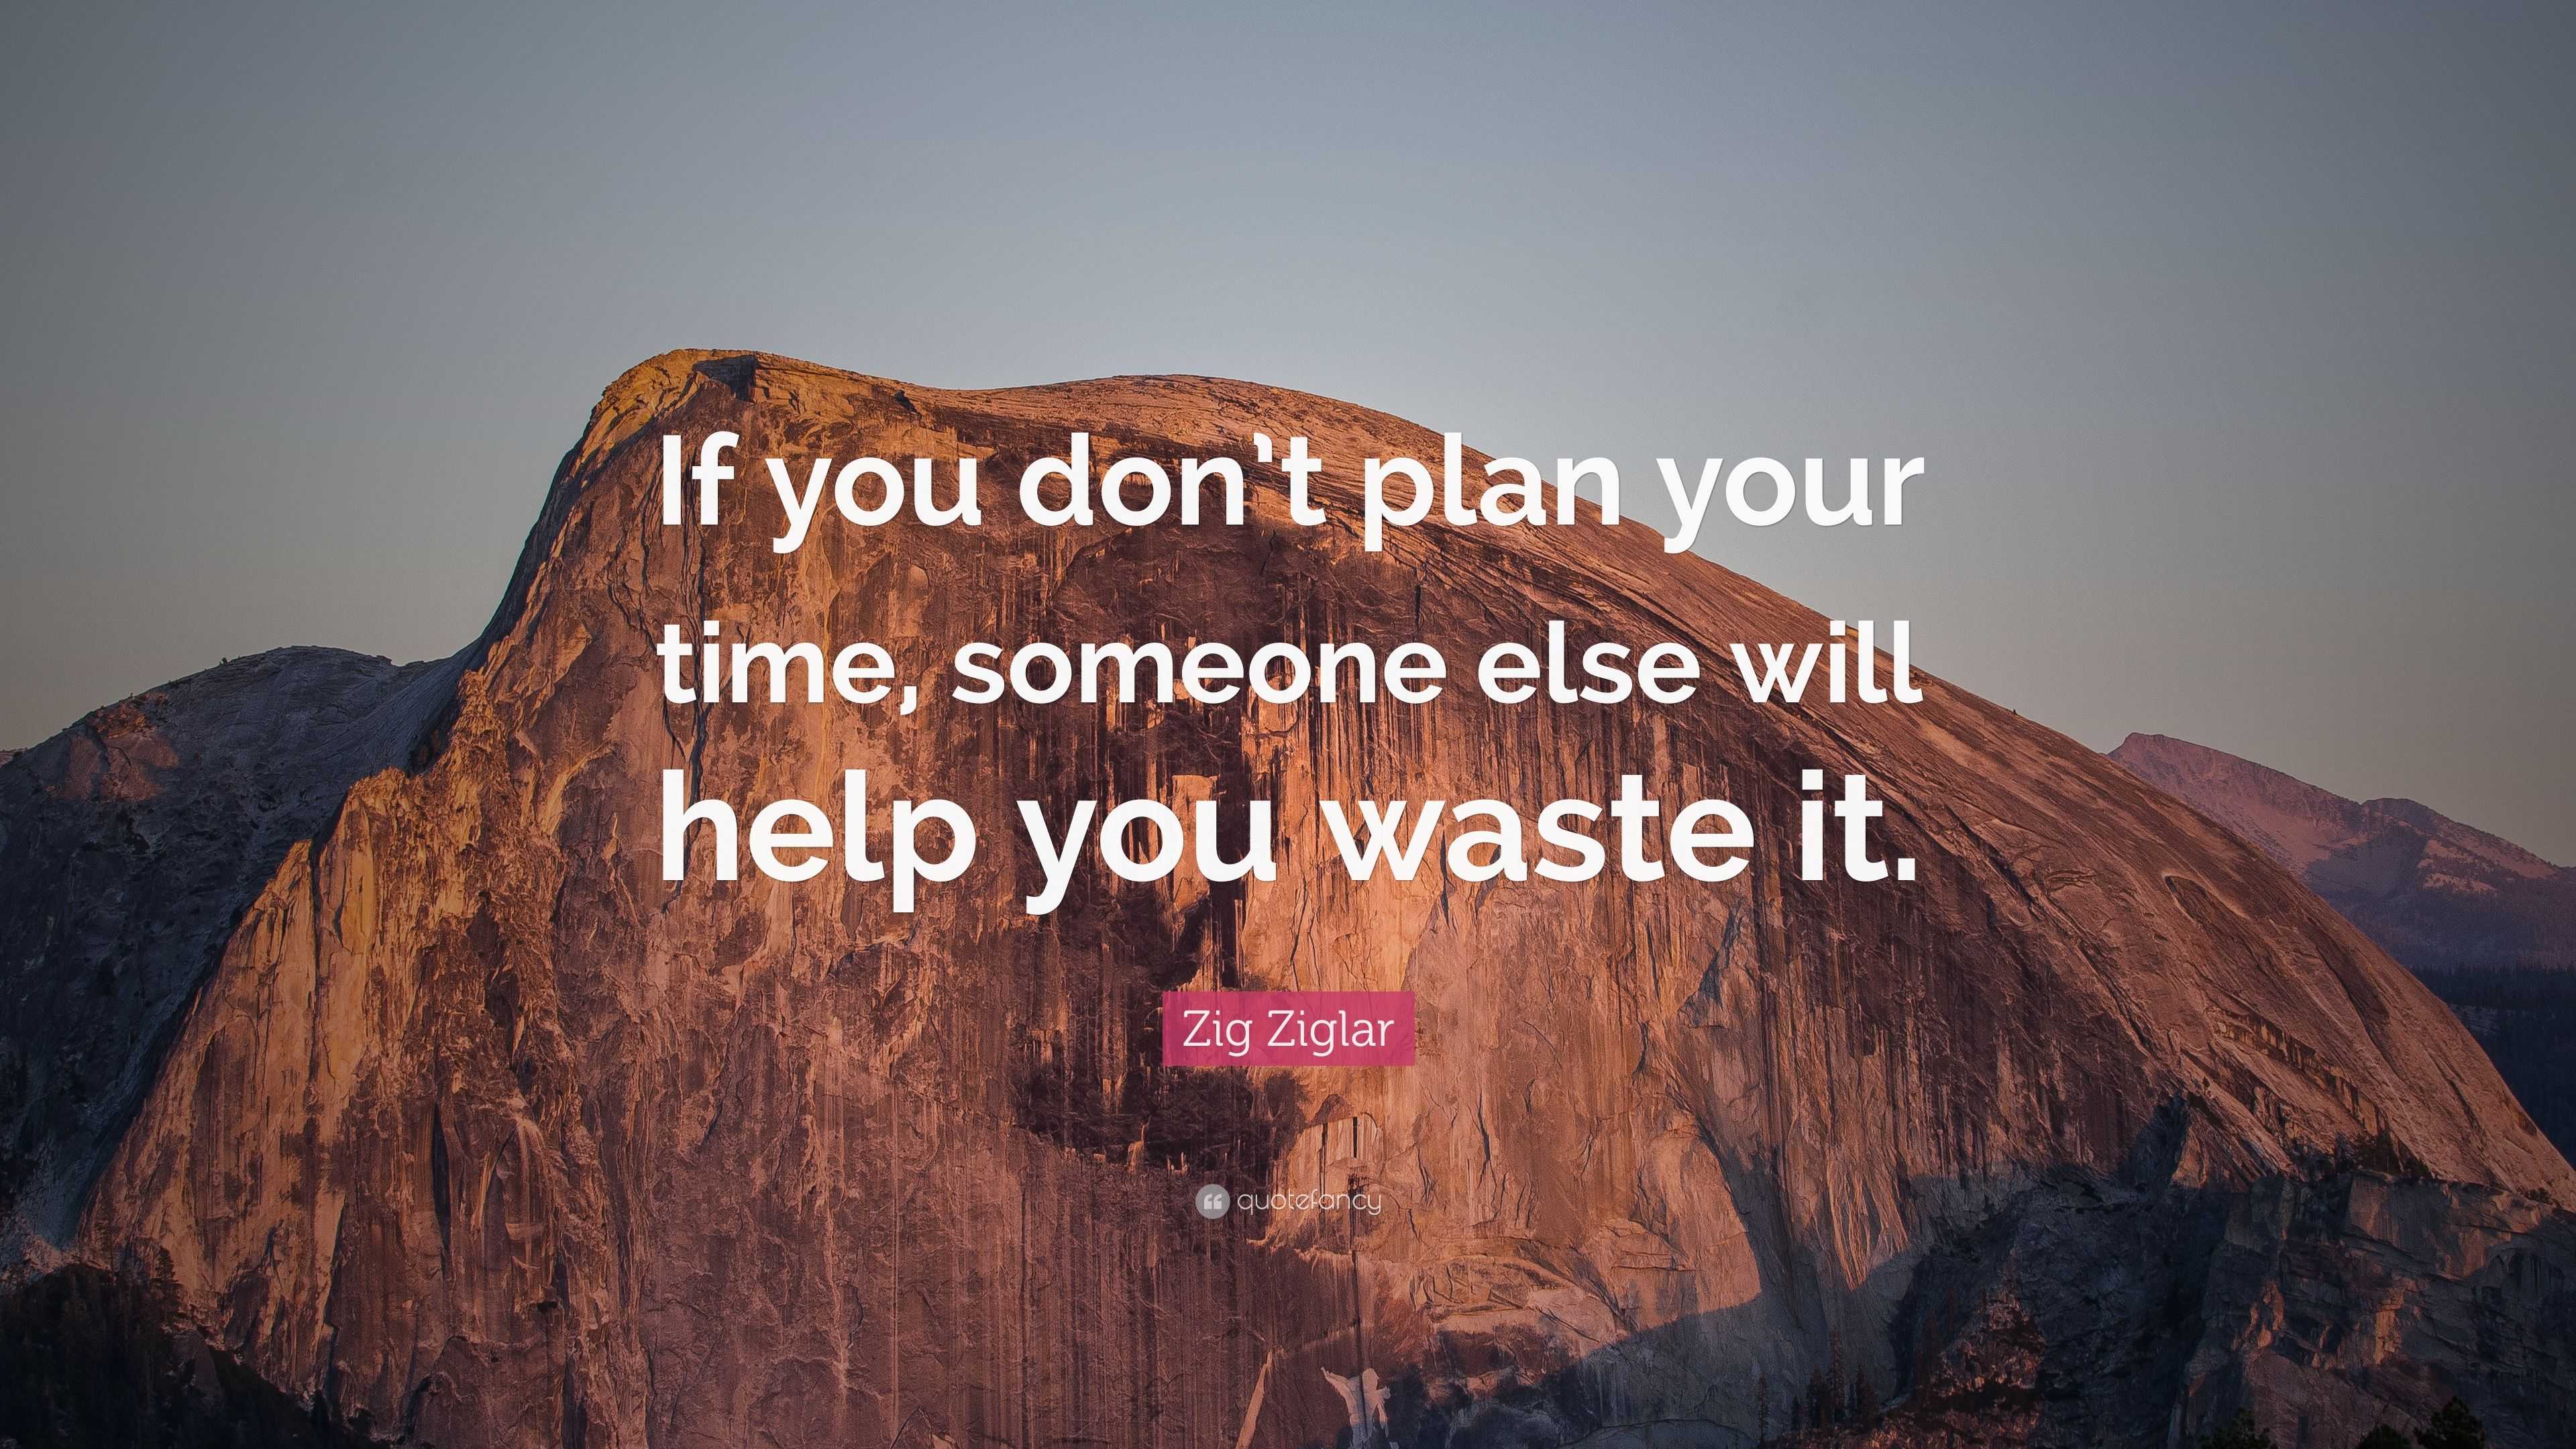 Zig Ziglar quote: If you don't plan your time, someone else will help